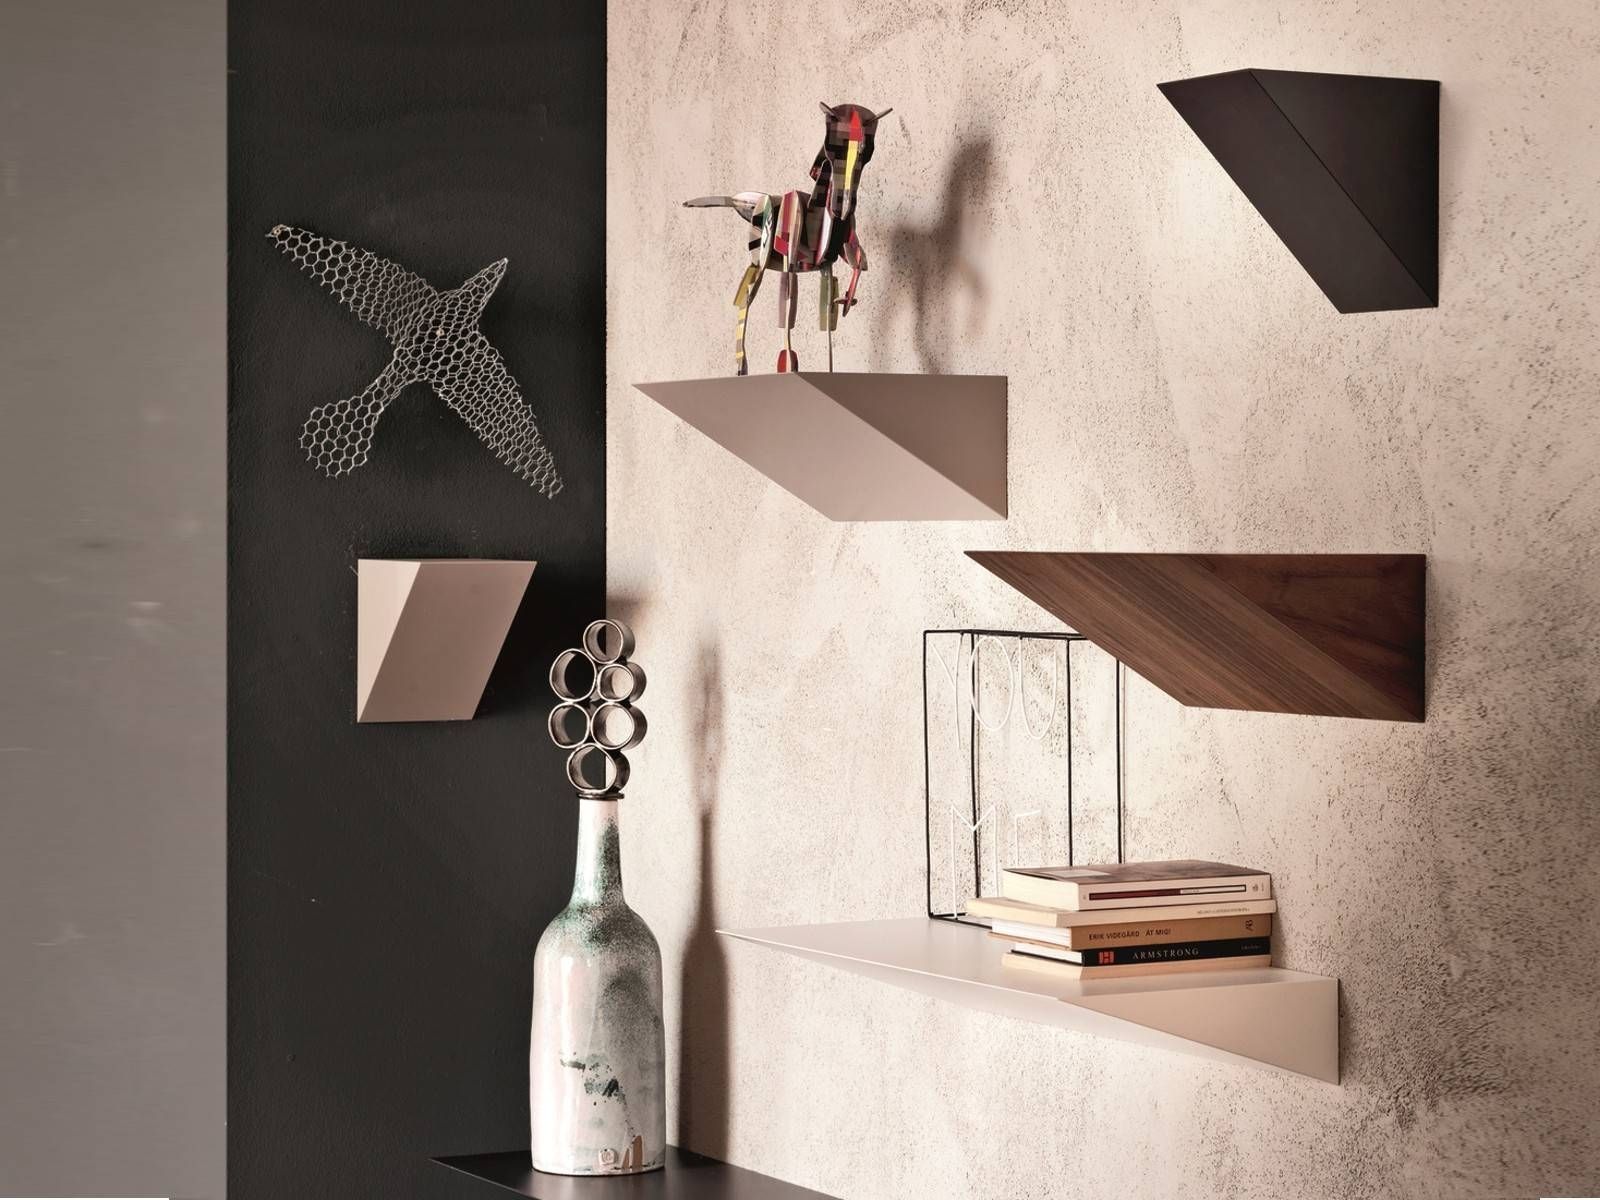 Decorations. Modern Wall Decor Shelves Ideas: Wall Decor Shelves Intended For Most Up To Date Target Bird Wall Decor (Gallery 8 of 30)